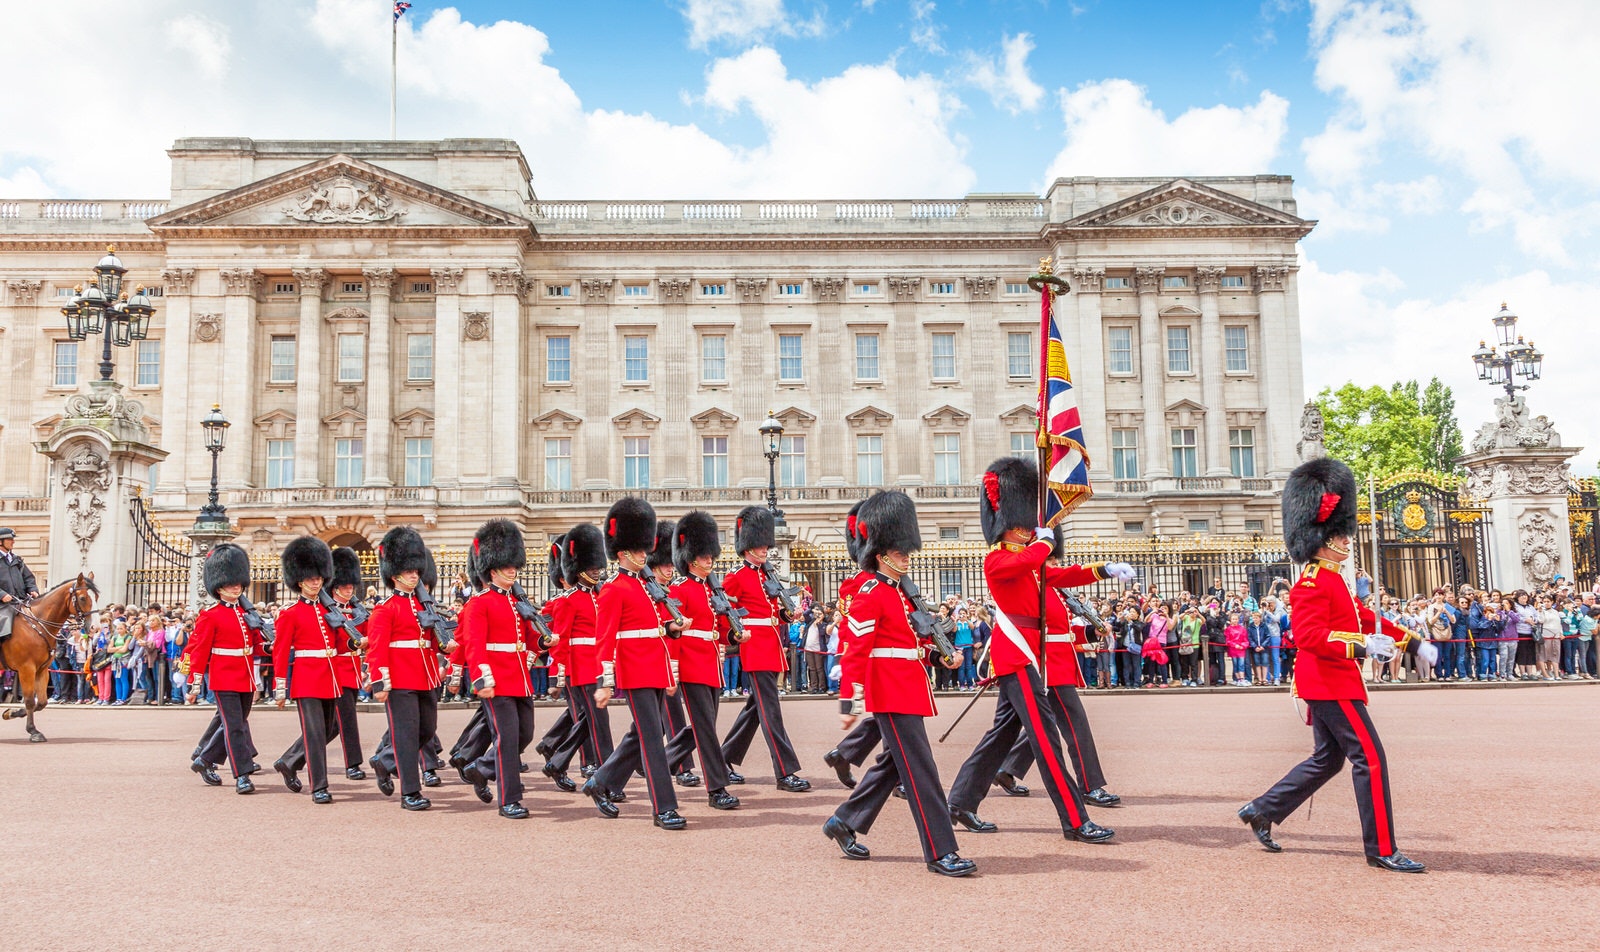 Officers and soldiers of the Coldstream Guards march in front of Buckingham Palace during the Changing of the Guard ceremony.